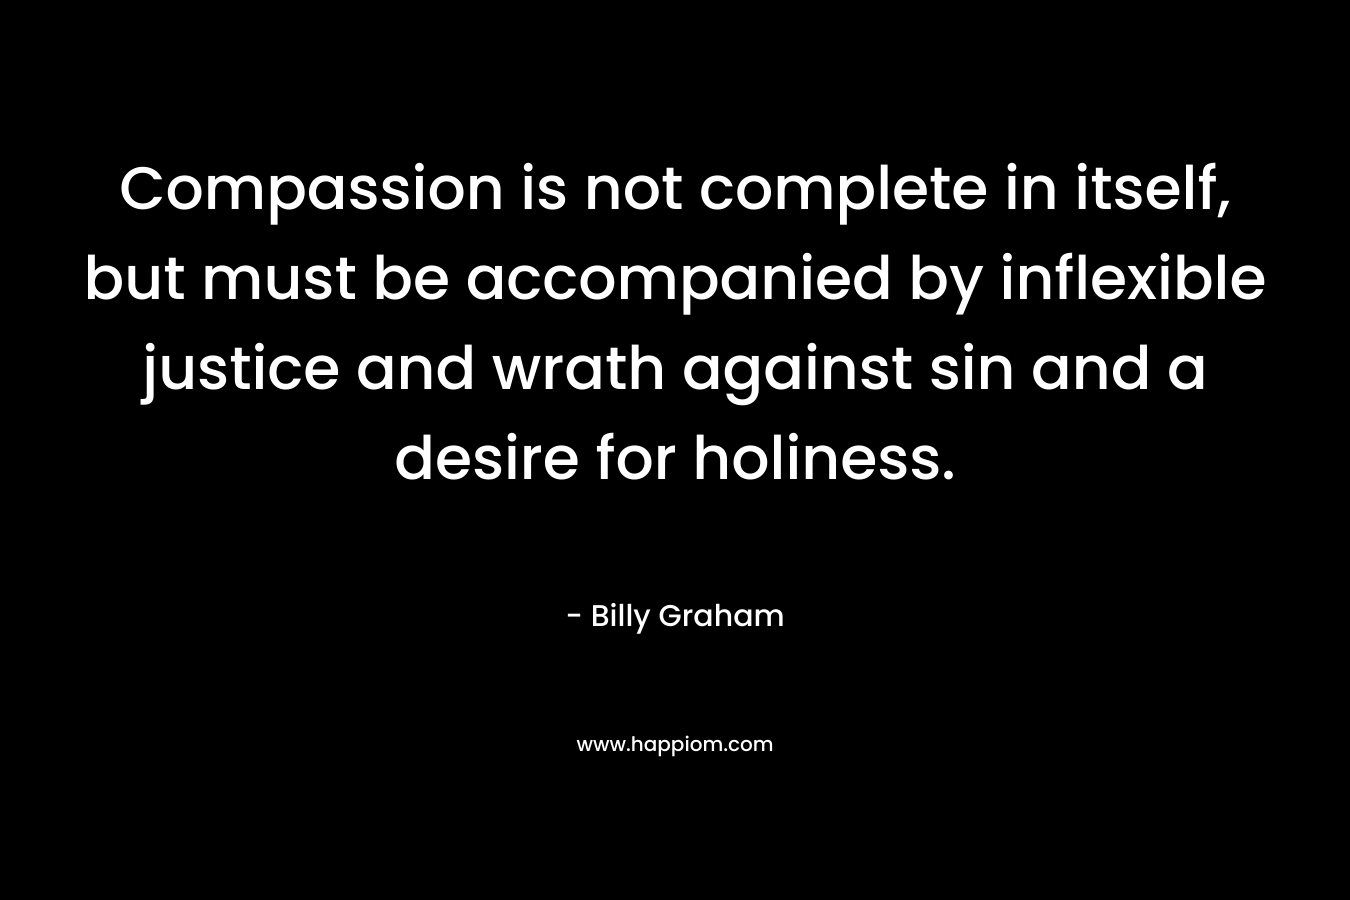 Compassion is not complete in itself, but must be accompanied by inflexible justice and wrath against sin and a desire for holiness.